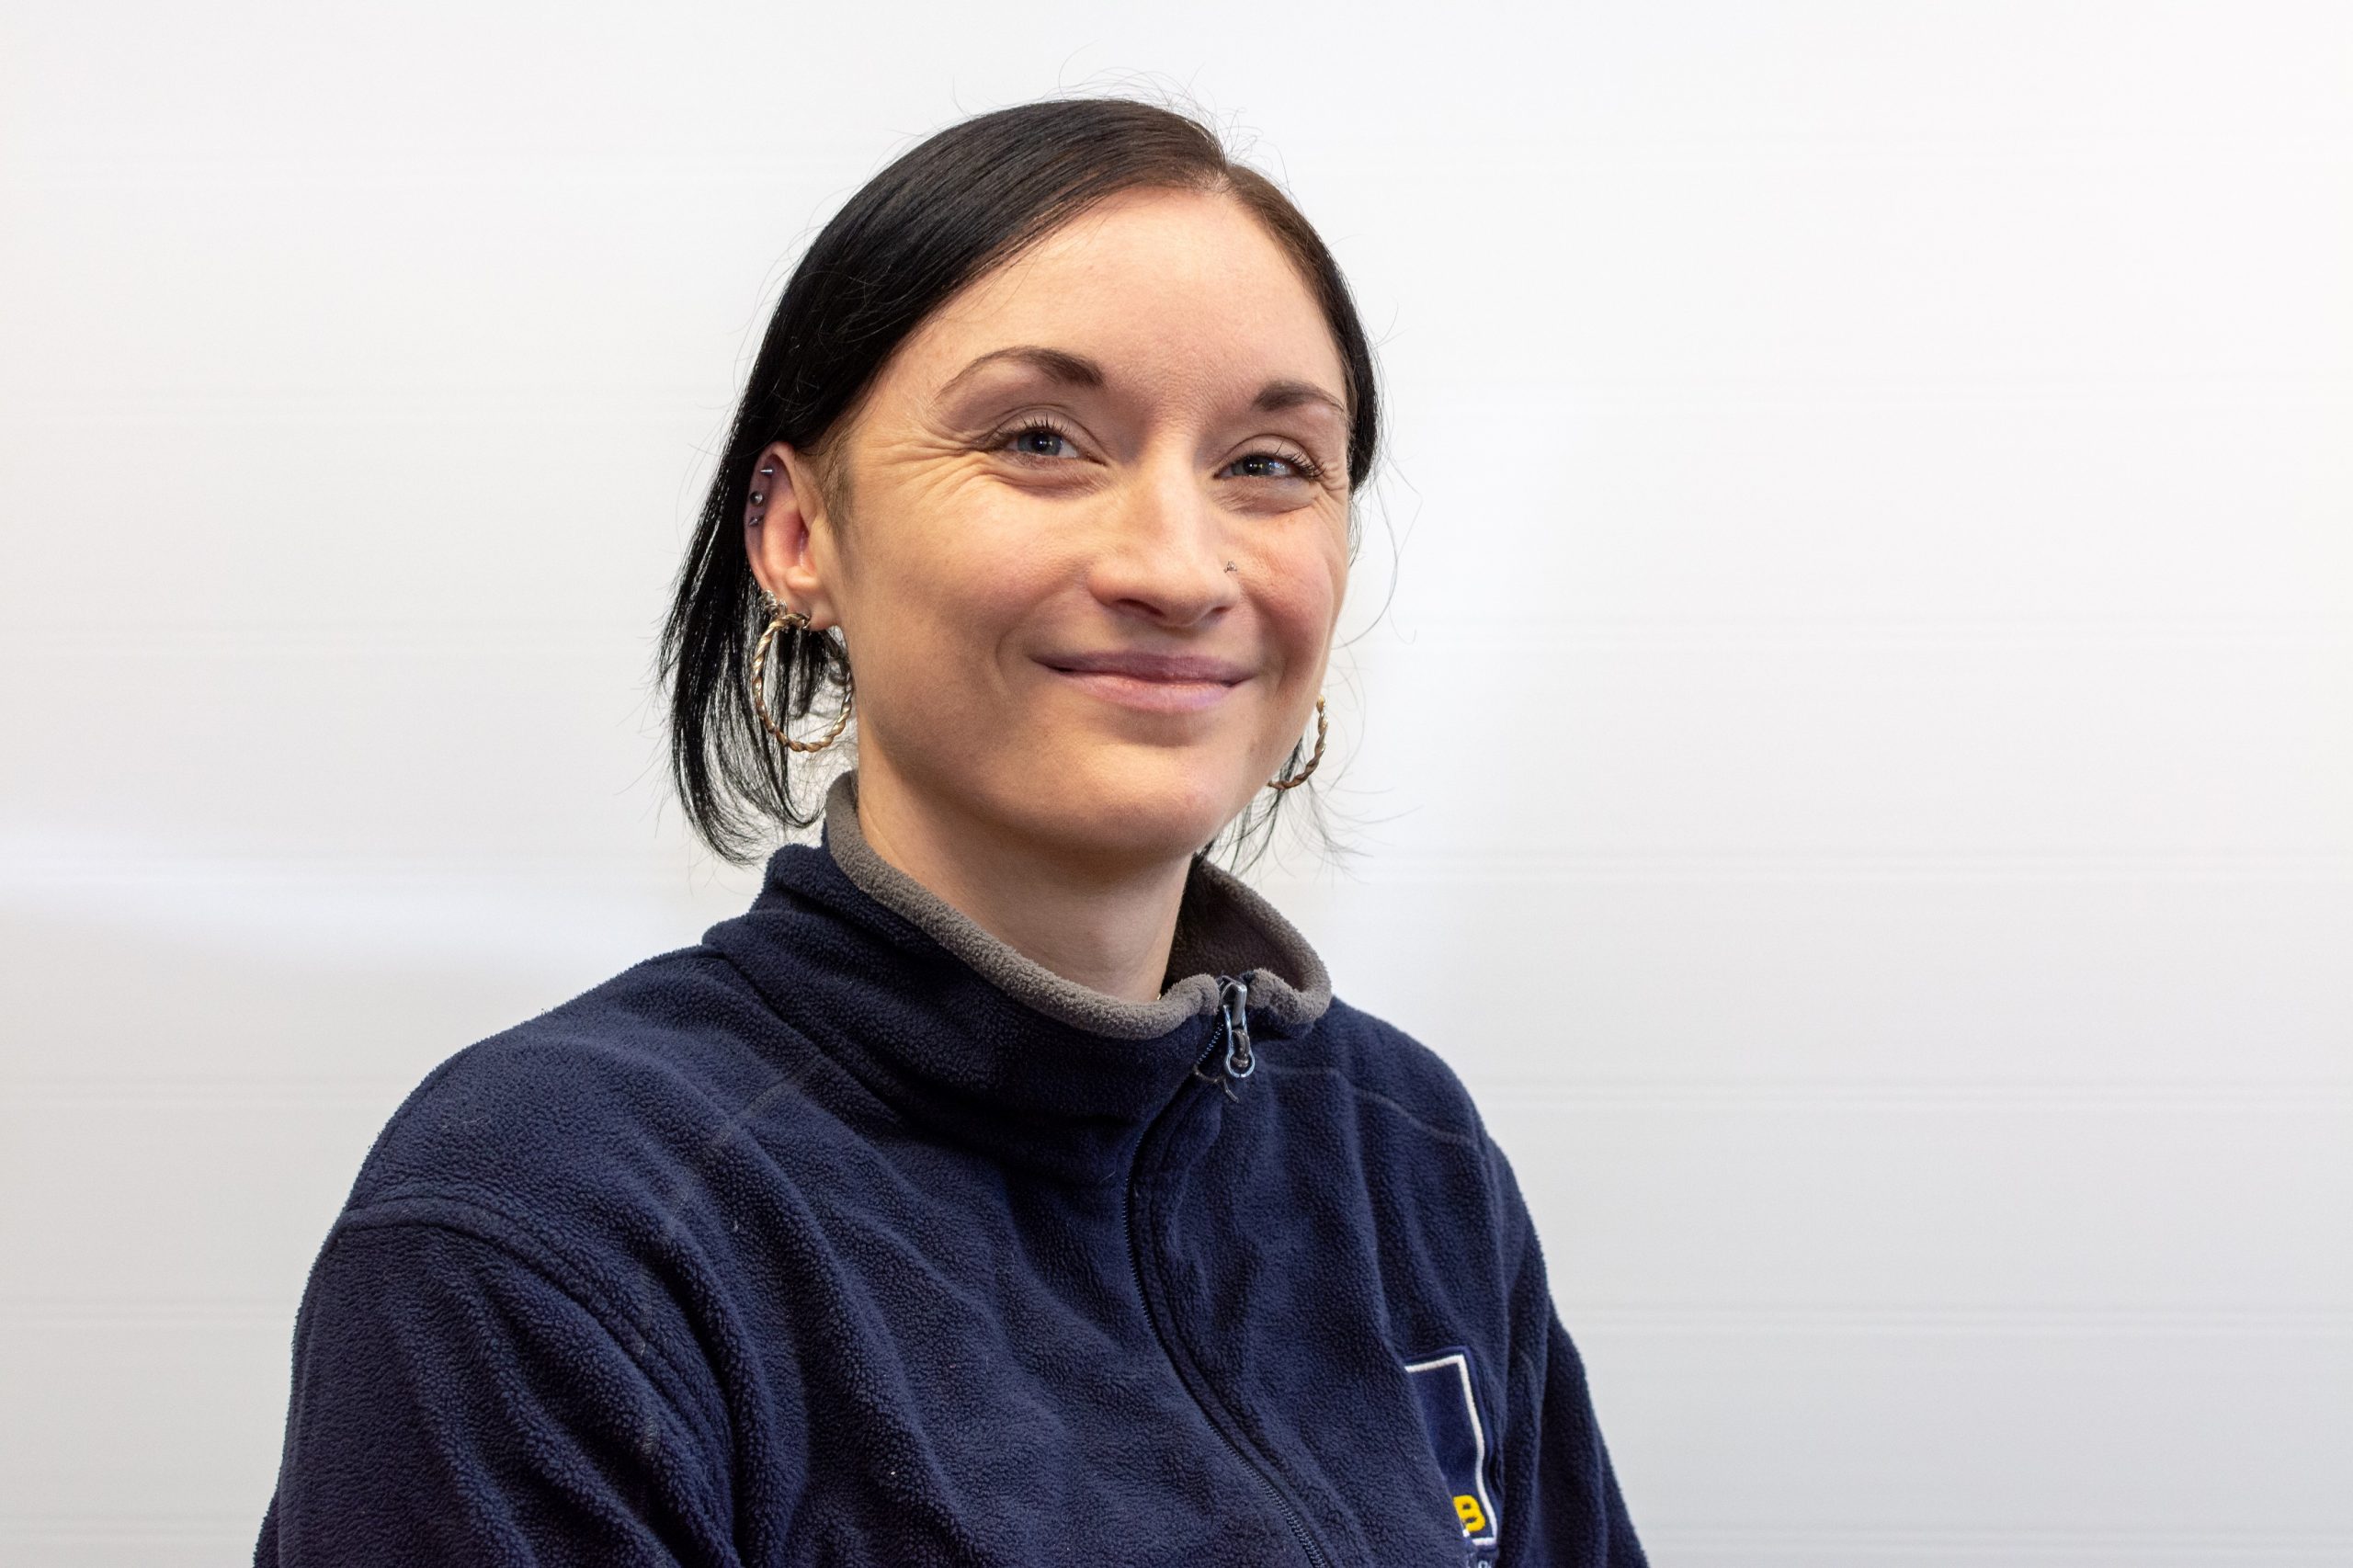 RTITB Instructor Academy Appoints Laura Mack as Manager